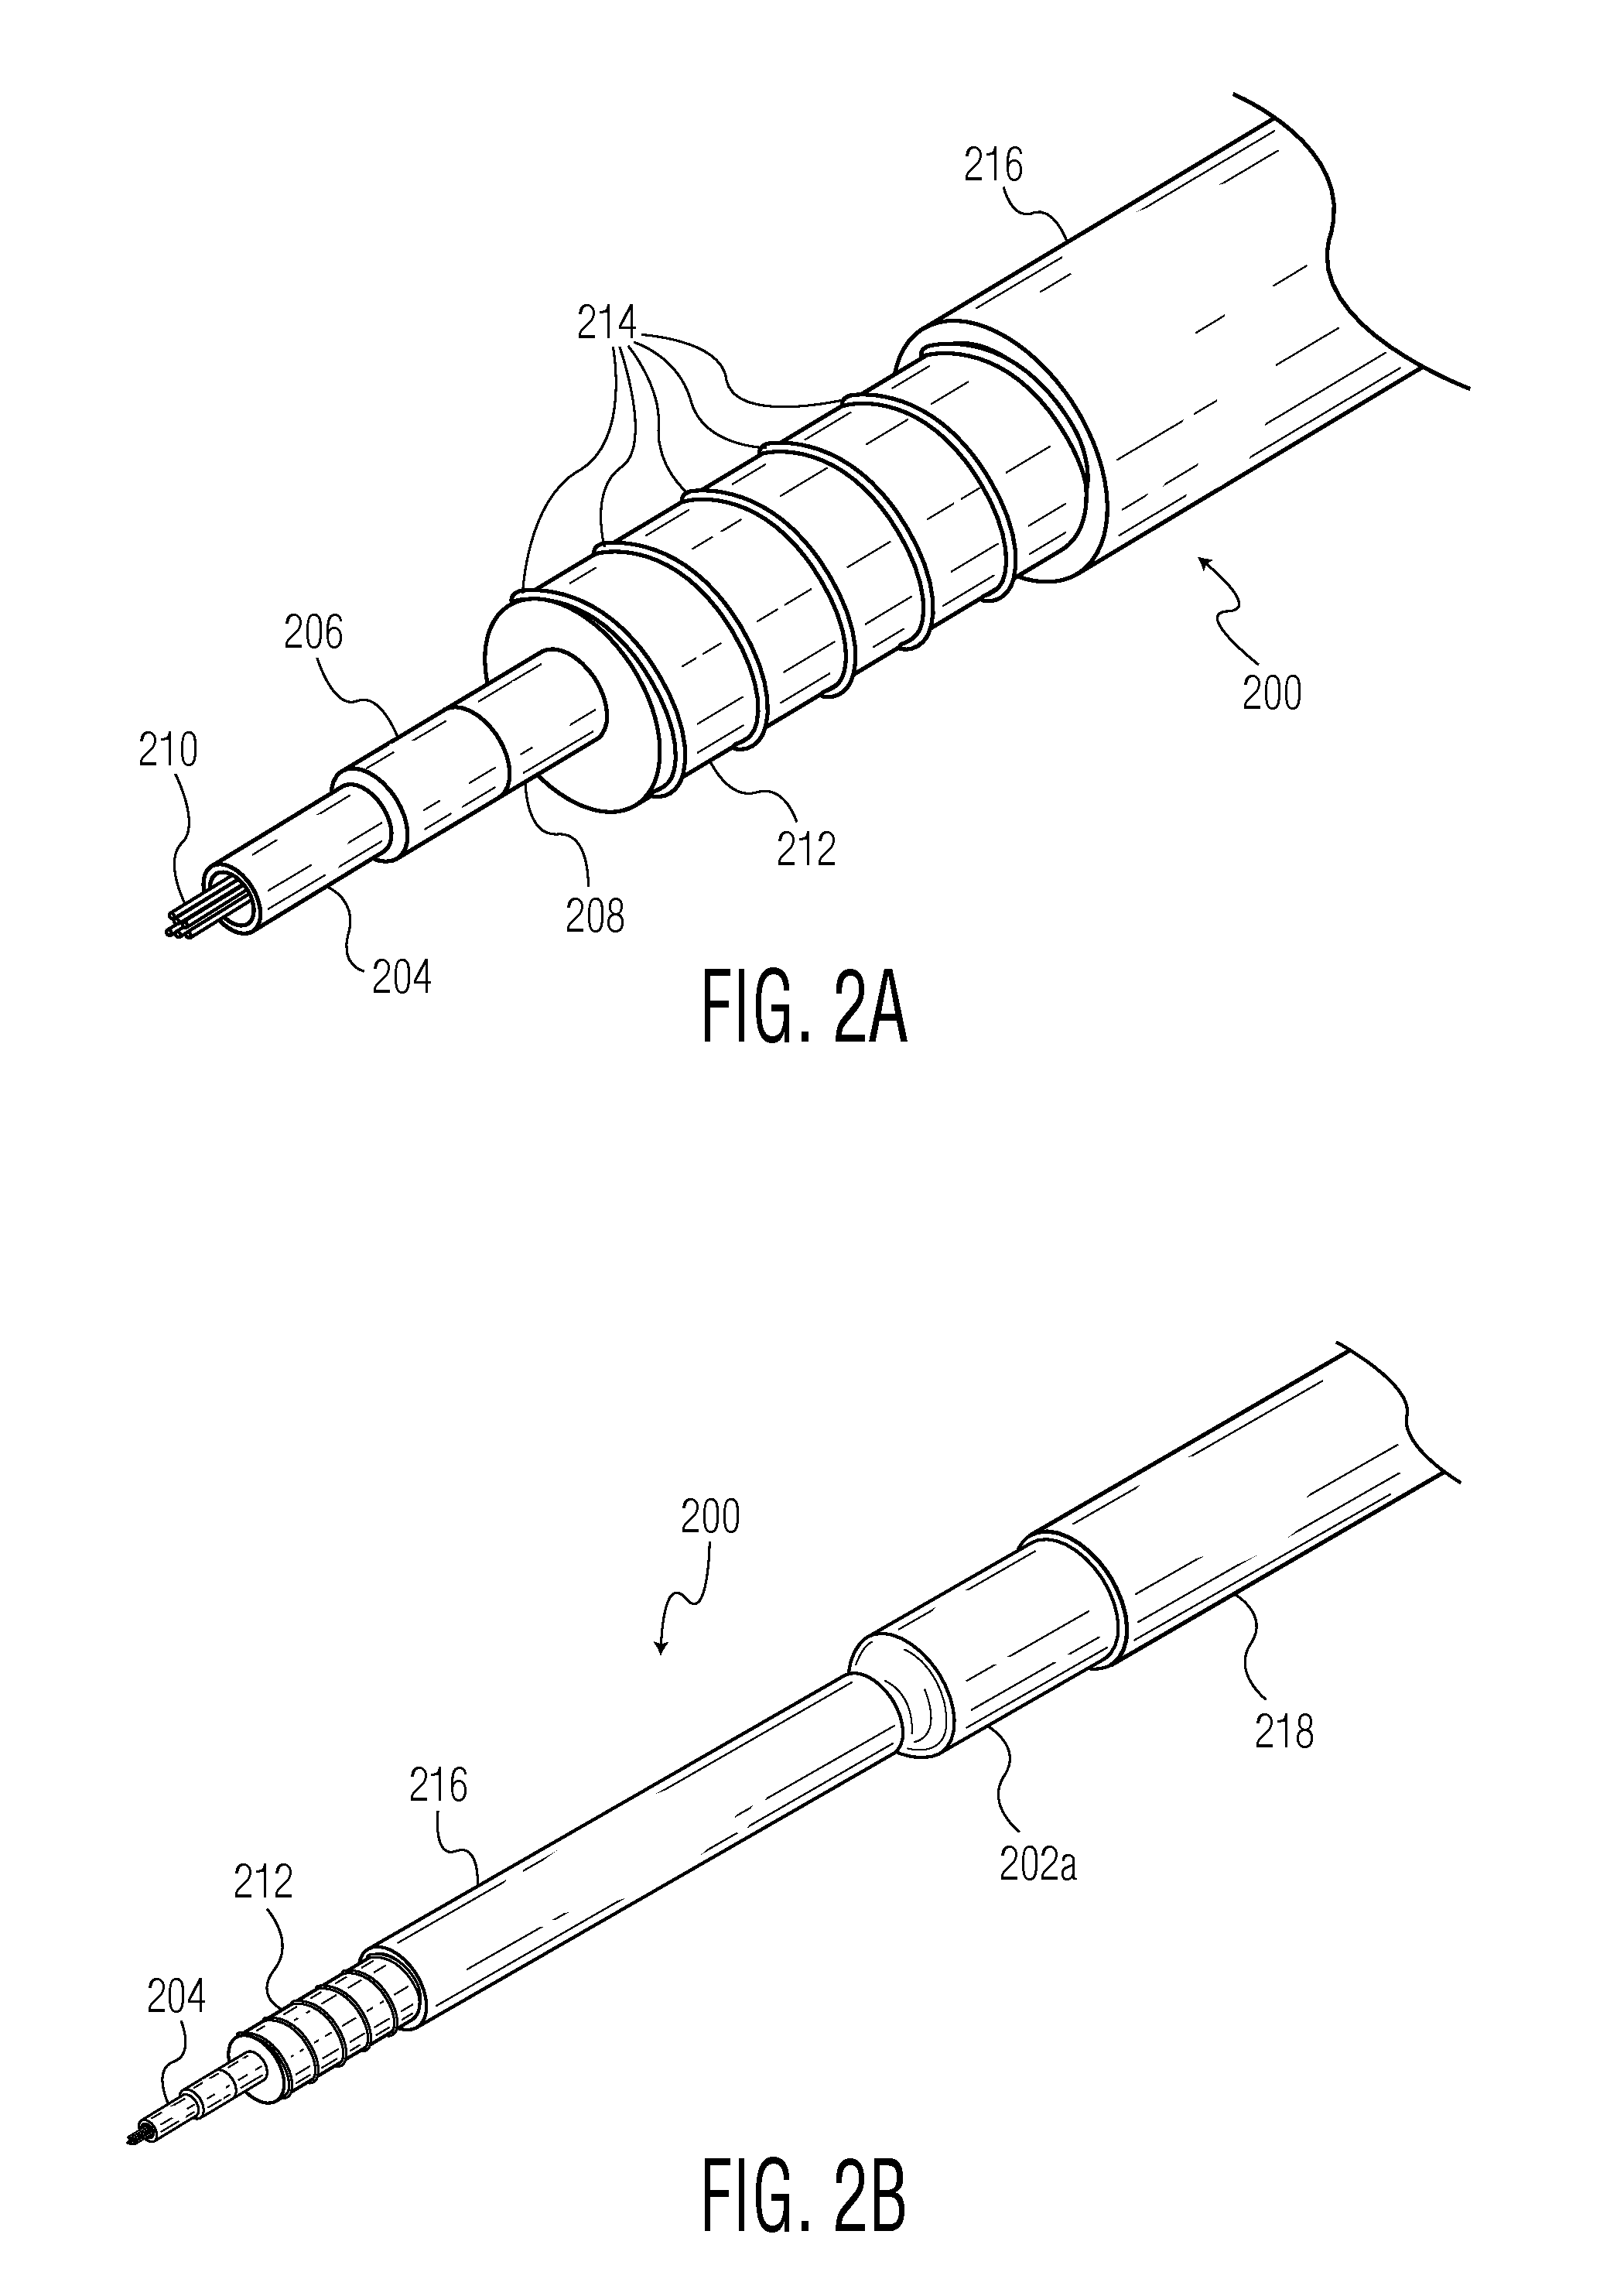 Fiber optic acoustic sensor arrays and systems, and methods of fabricating the same